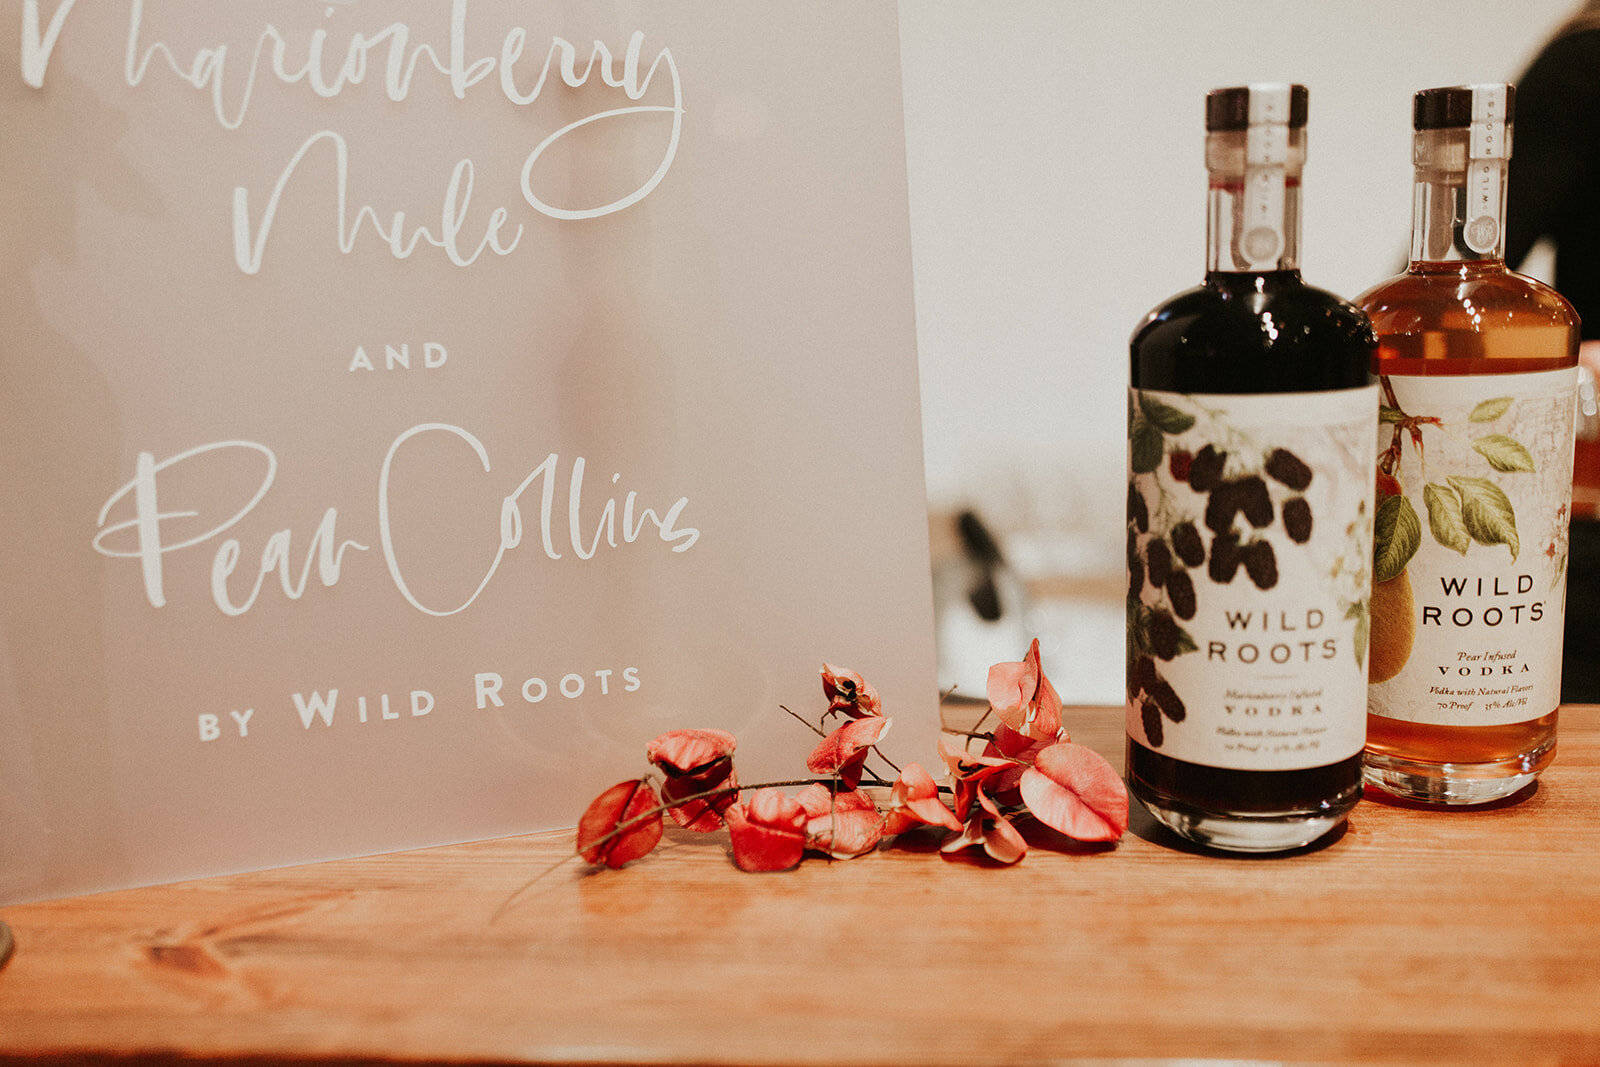 Wild Roots Huckleberry Mule Pear Collins Wallpaper